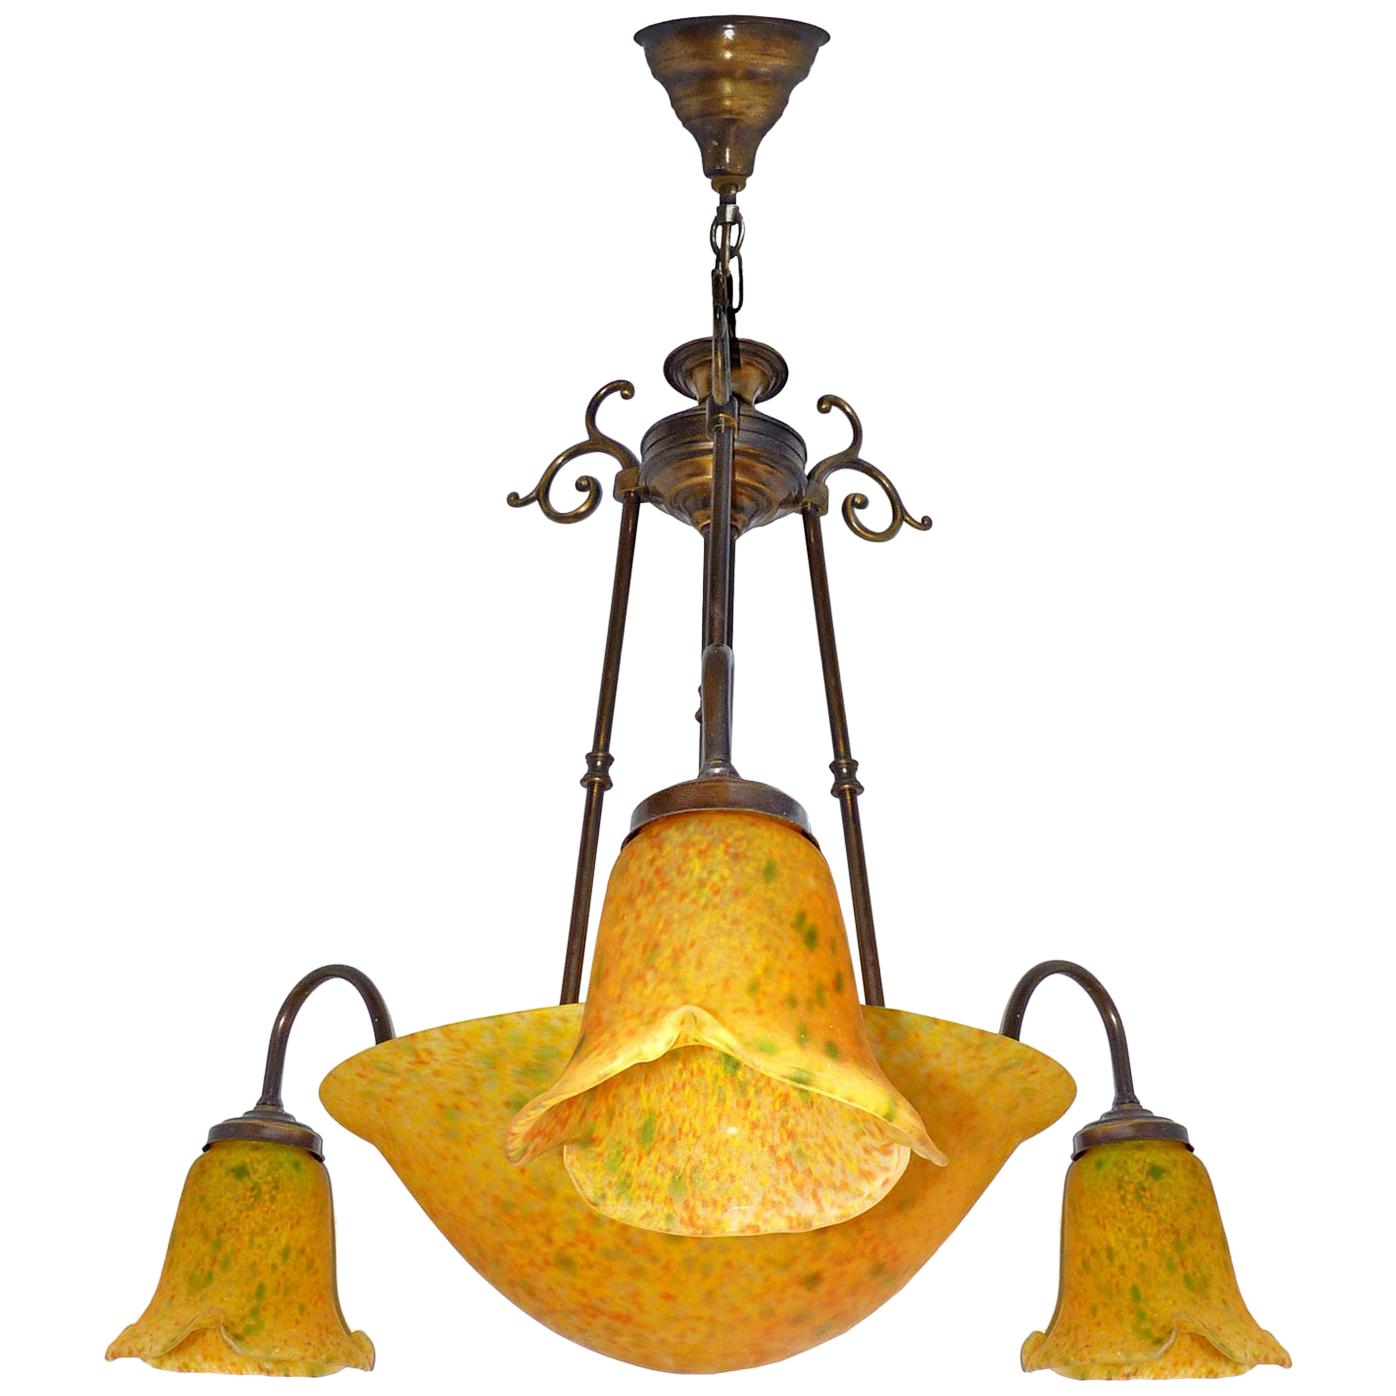 French Art Deco and Art Nouveau Polychrome Amber Glass 4-Light Chandelier For Sale